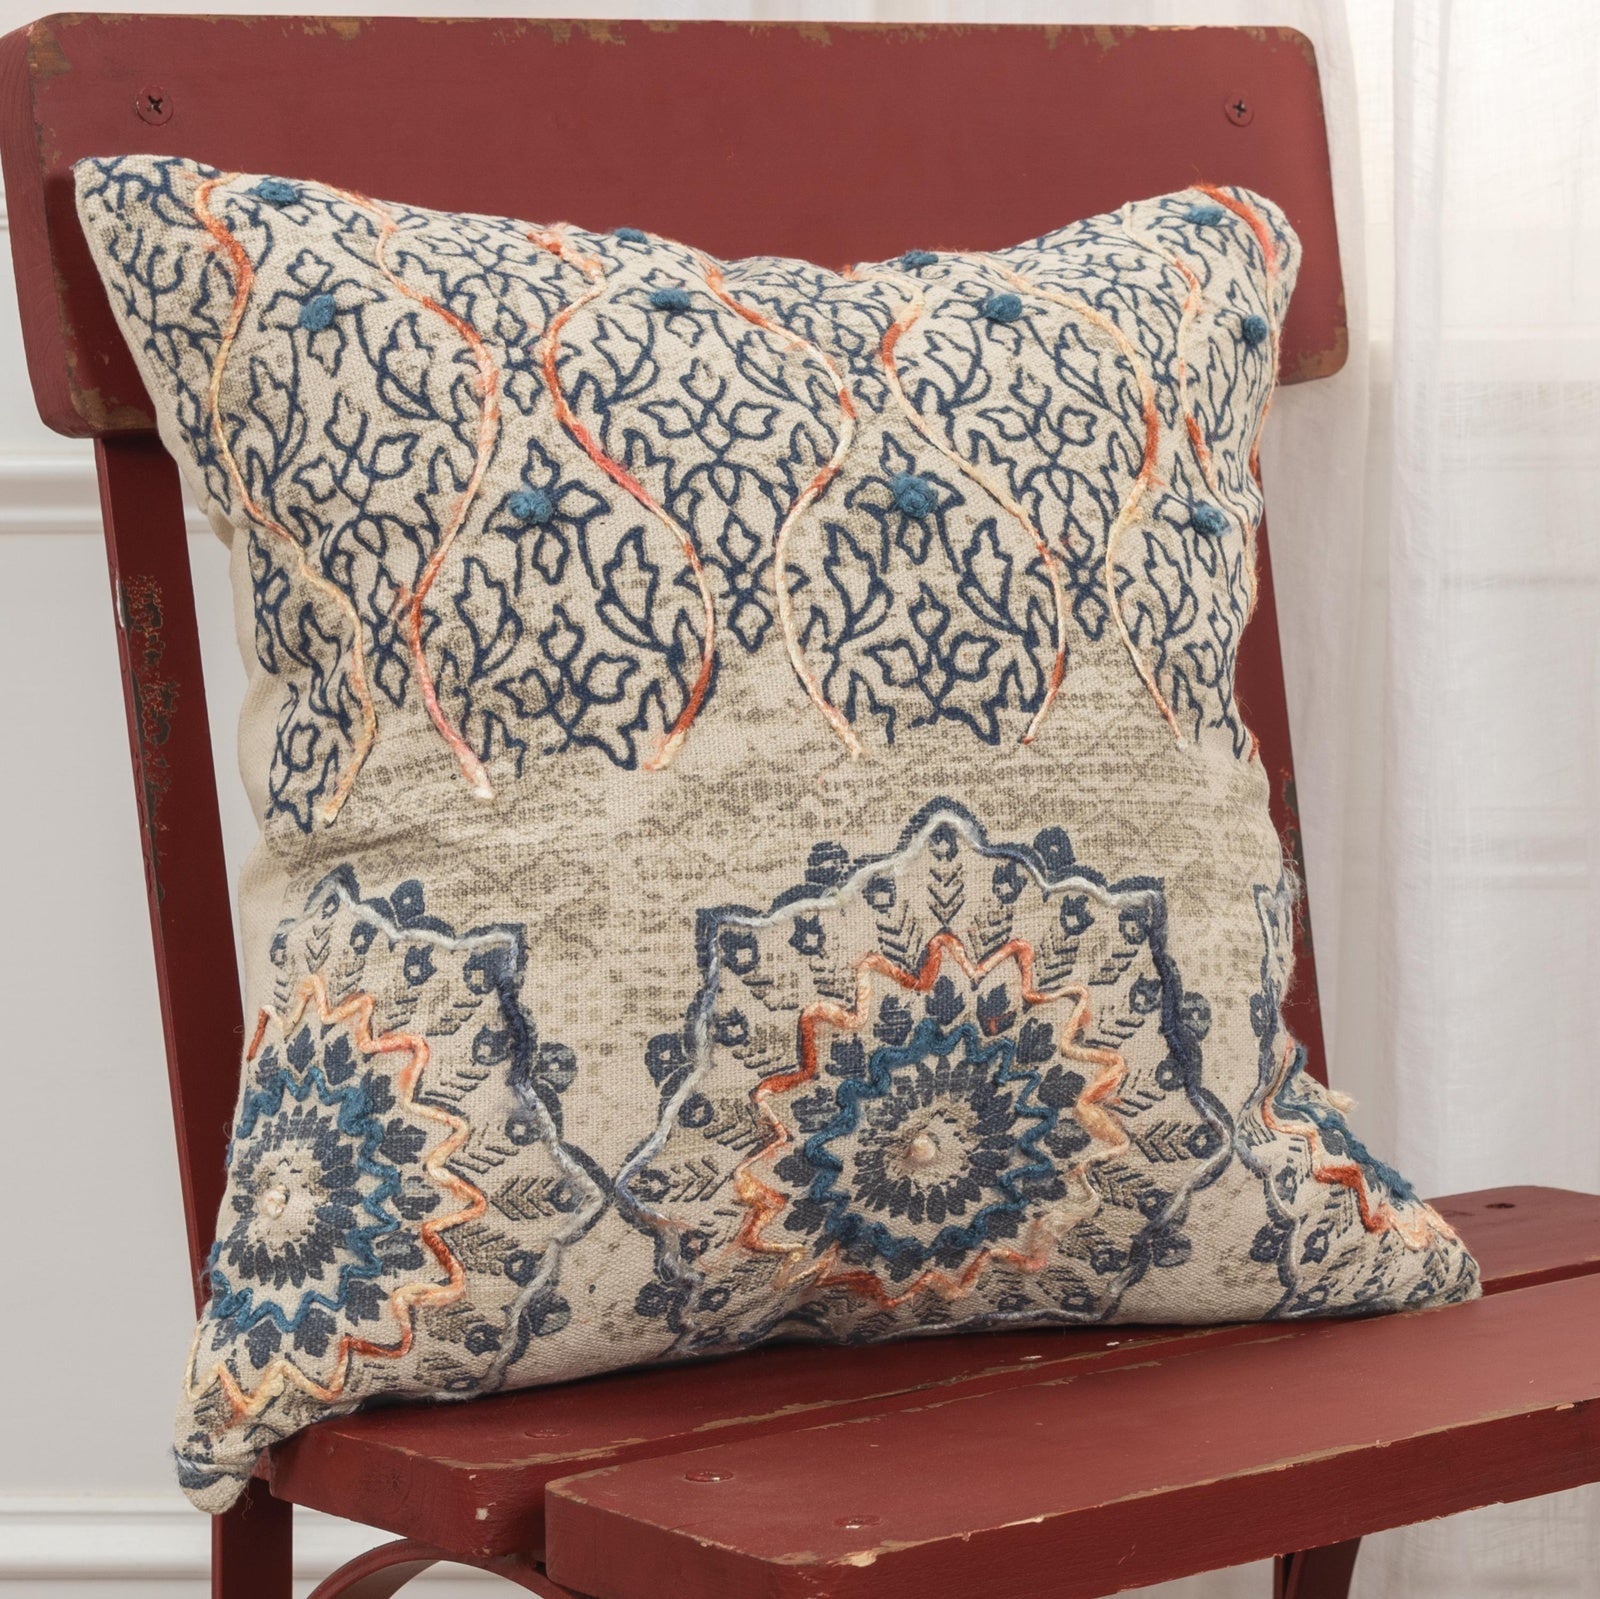 Knife-Edge-Printed-With-Embellishment-Cotton-Medallion-With-Vining-Accents-Pillow-Cover-Decorative-Pillows